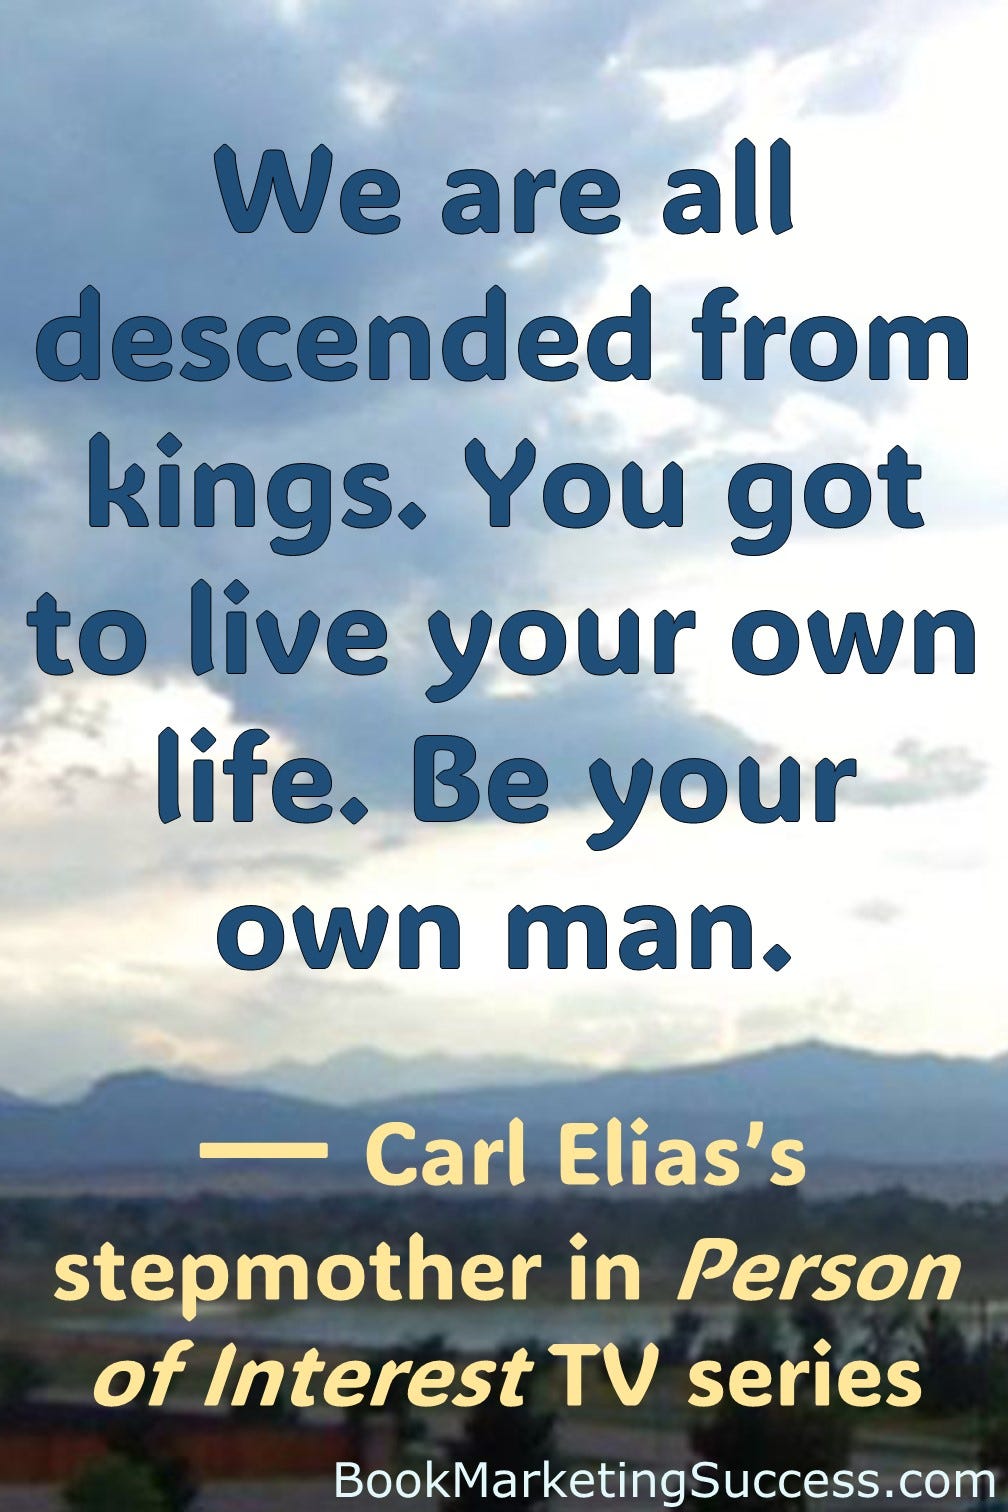 We are all descended from kings. You got to live your own life. Be your own man. — Carl Elias’s stepmother in Person of Interest TV series